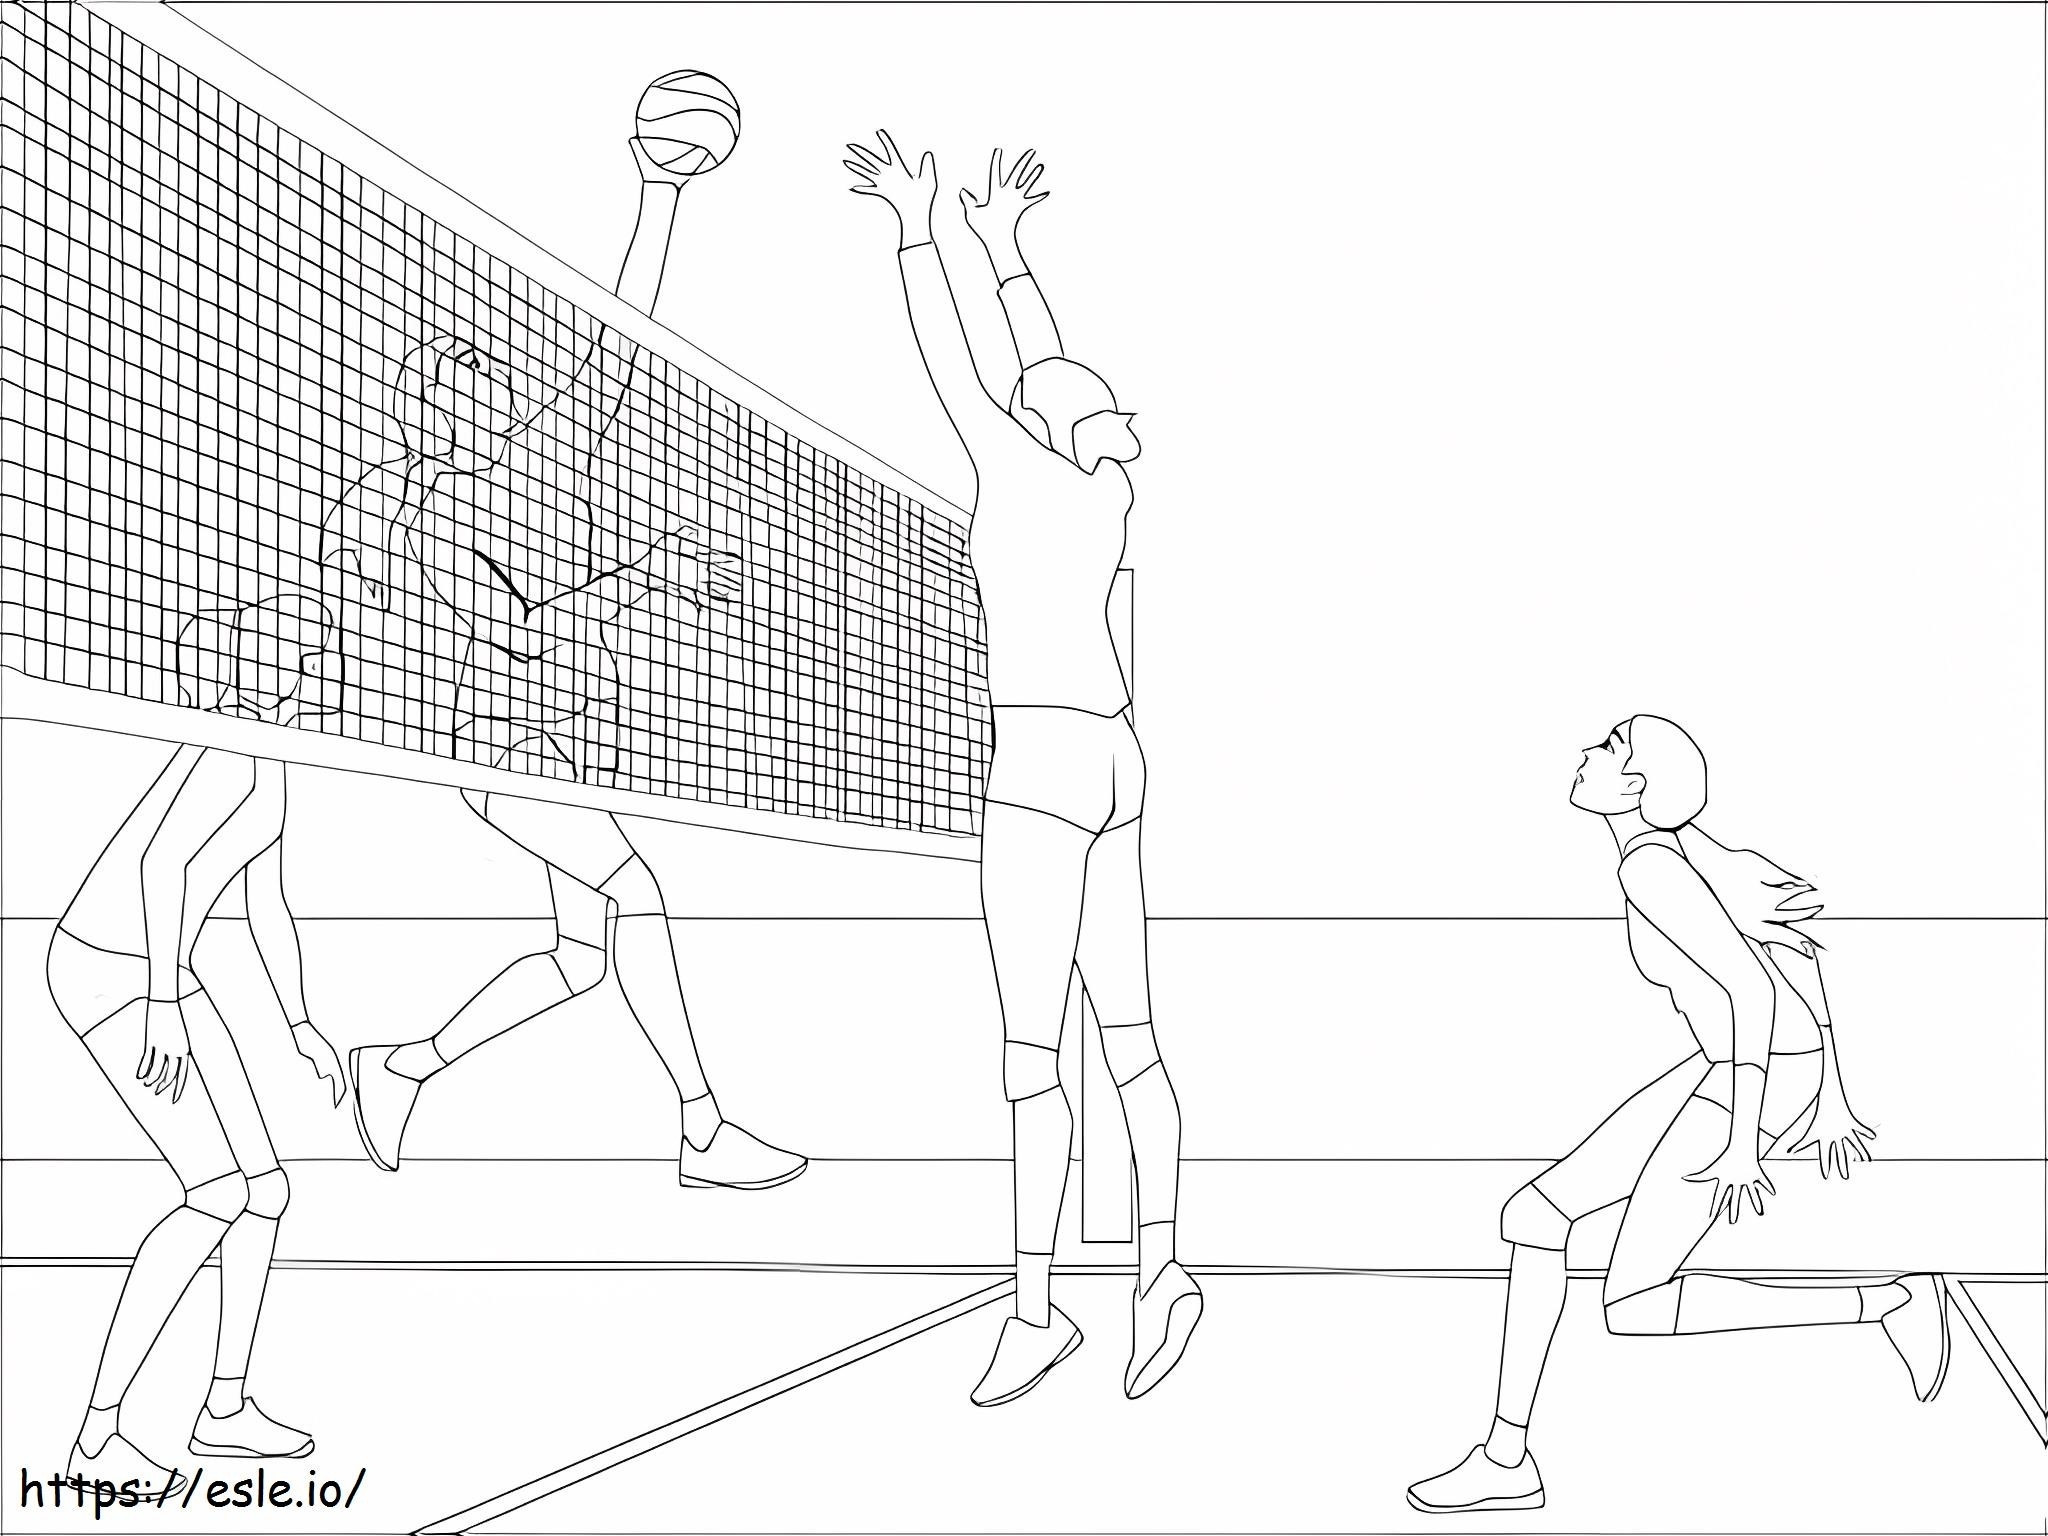 Volleyball Tournament coloring page